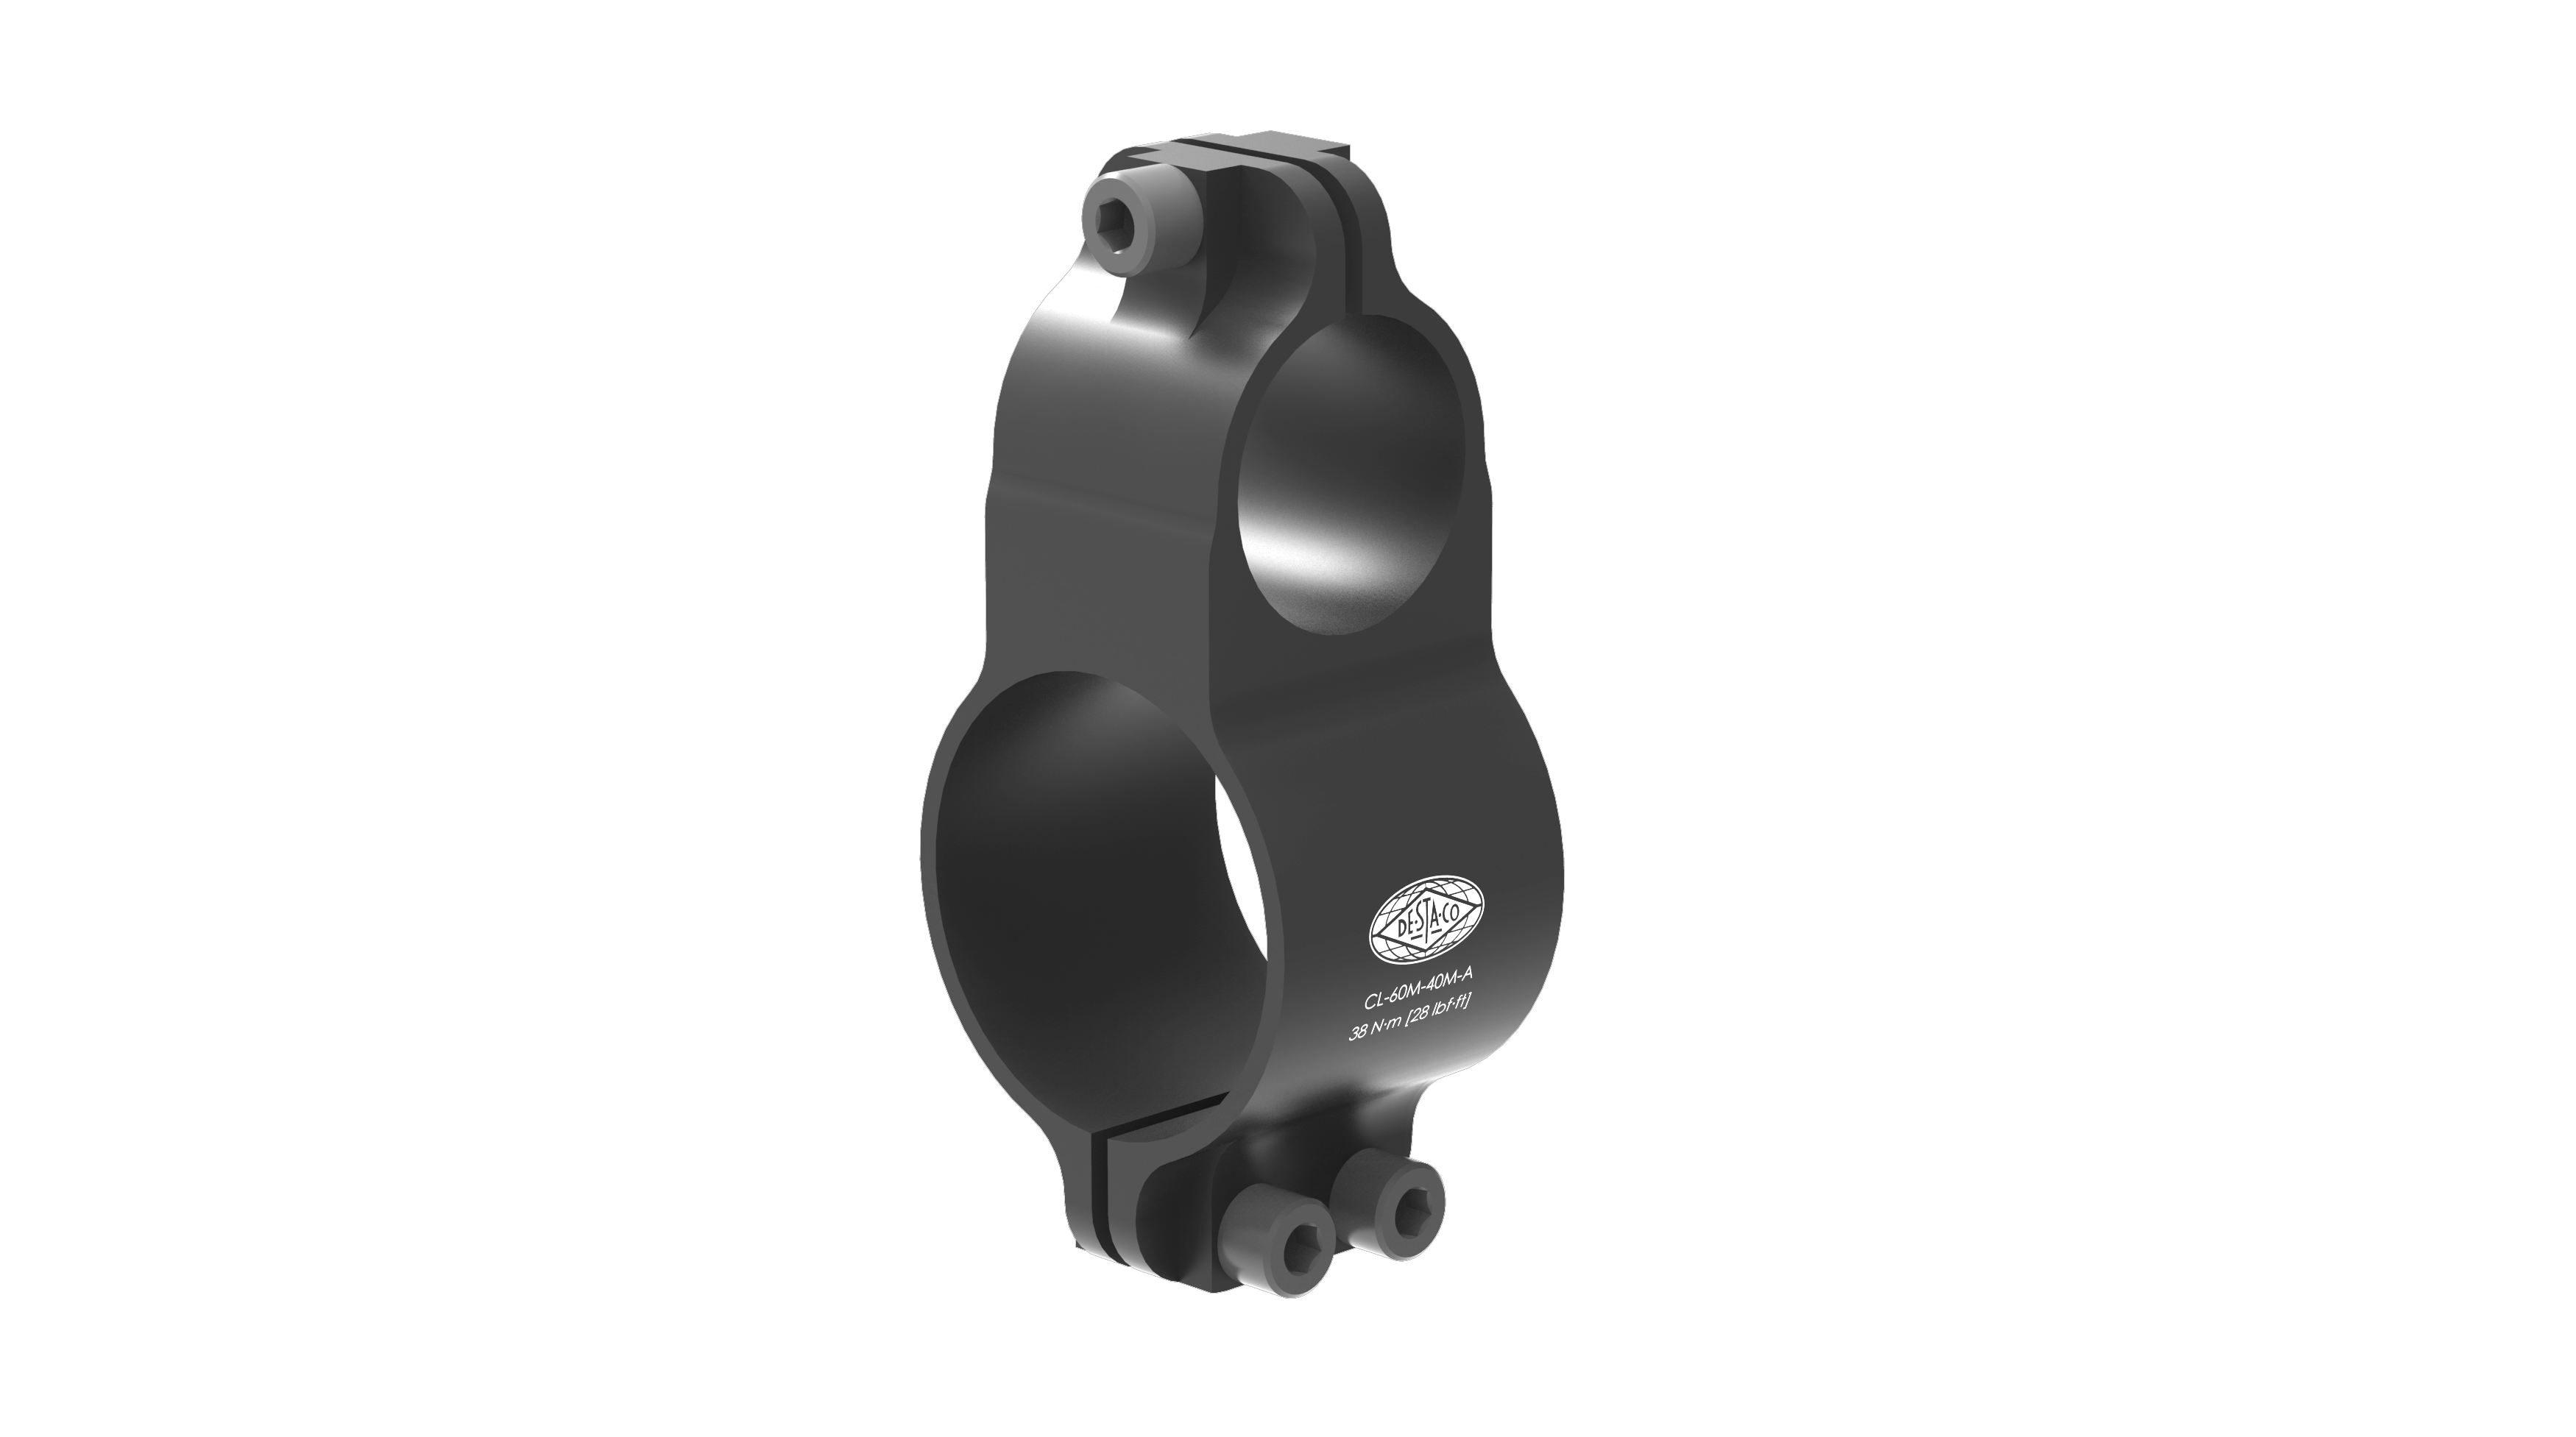 Destaco’s CL Series of mid flange mounts are made of aluminum and are designed for 1.50” tubes.